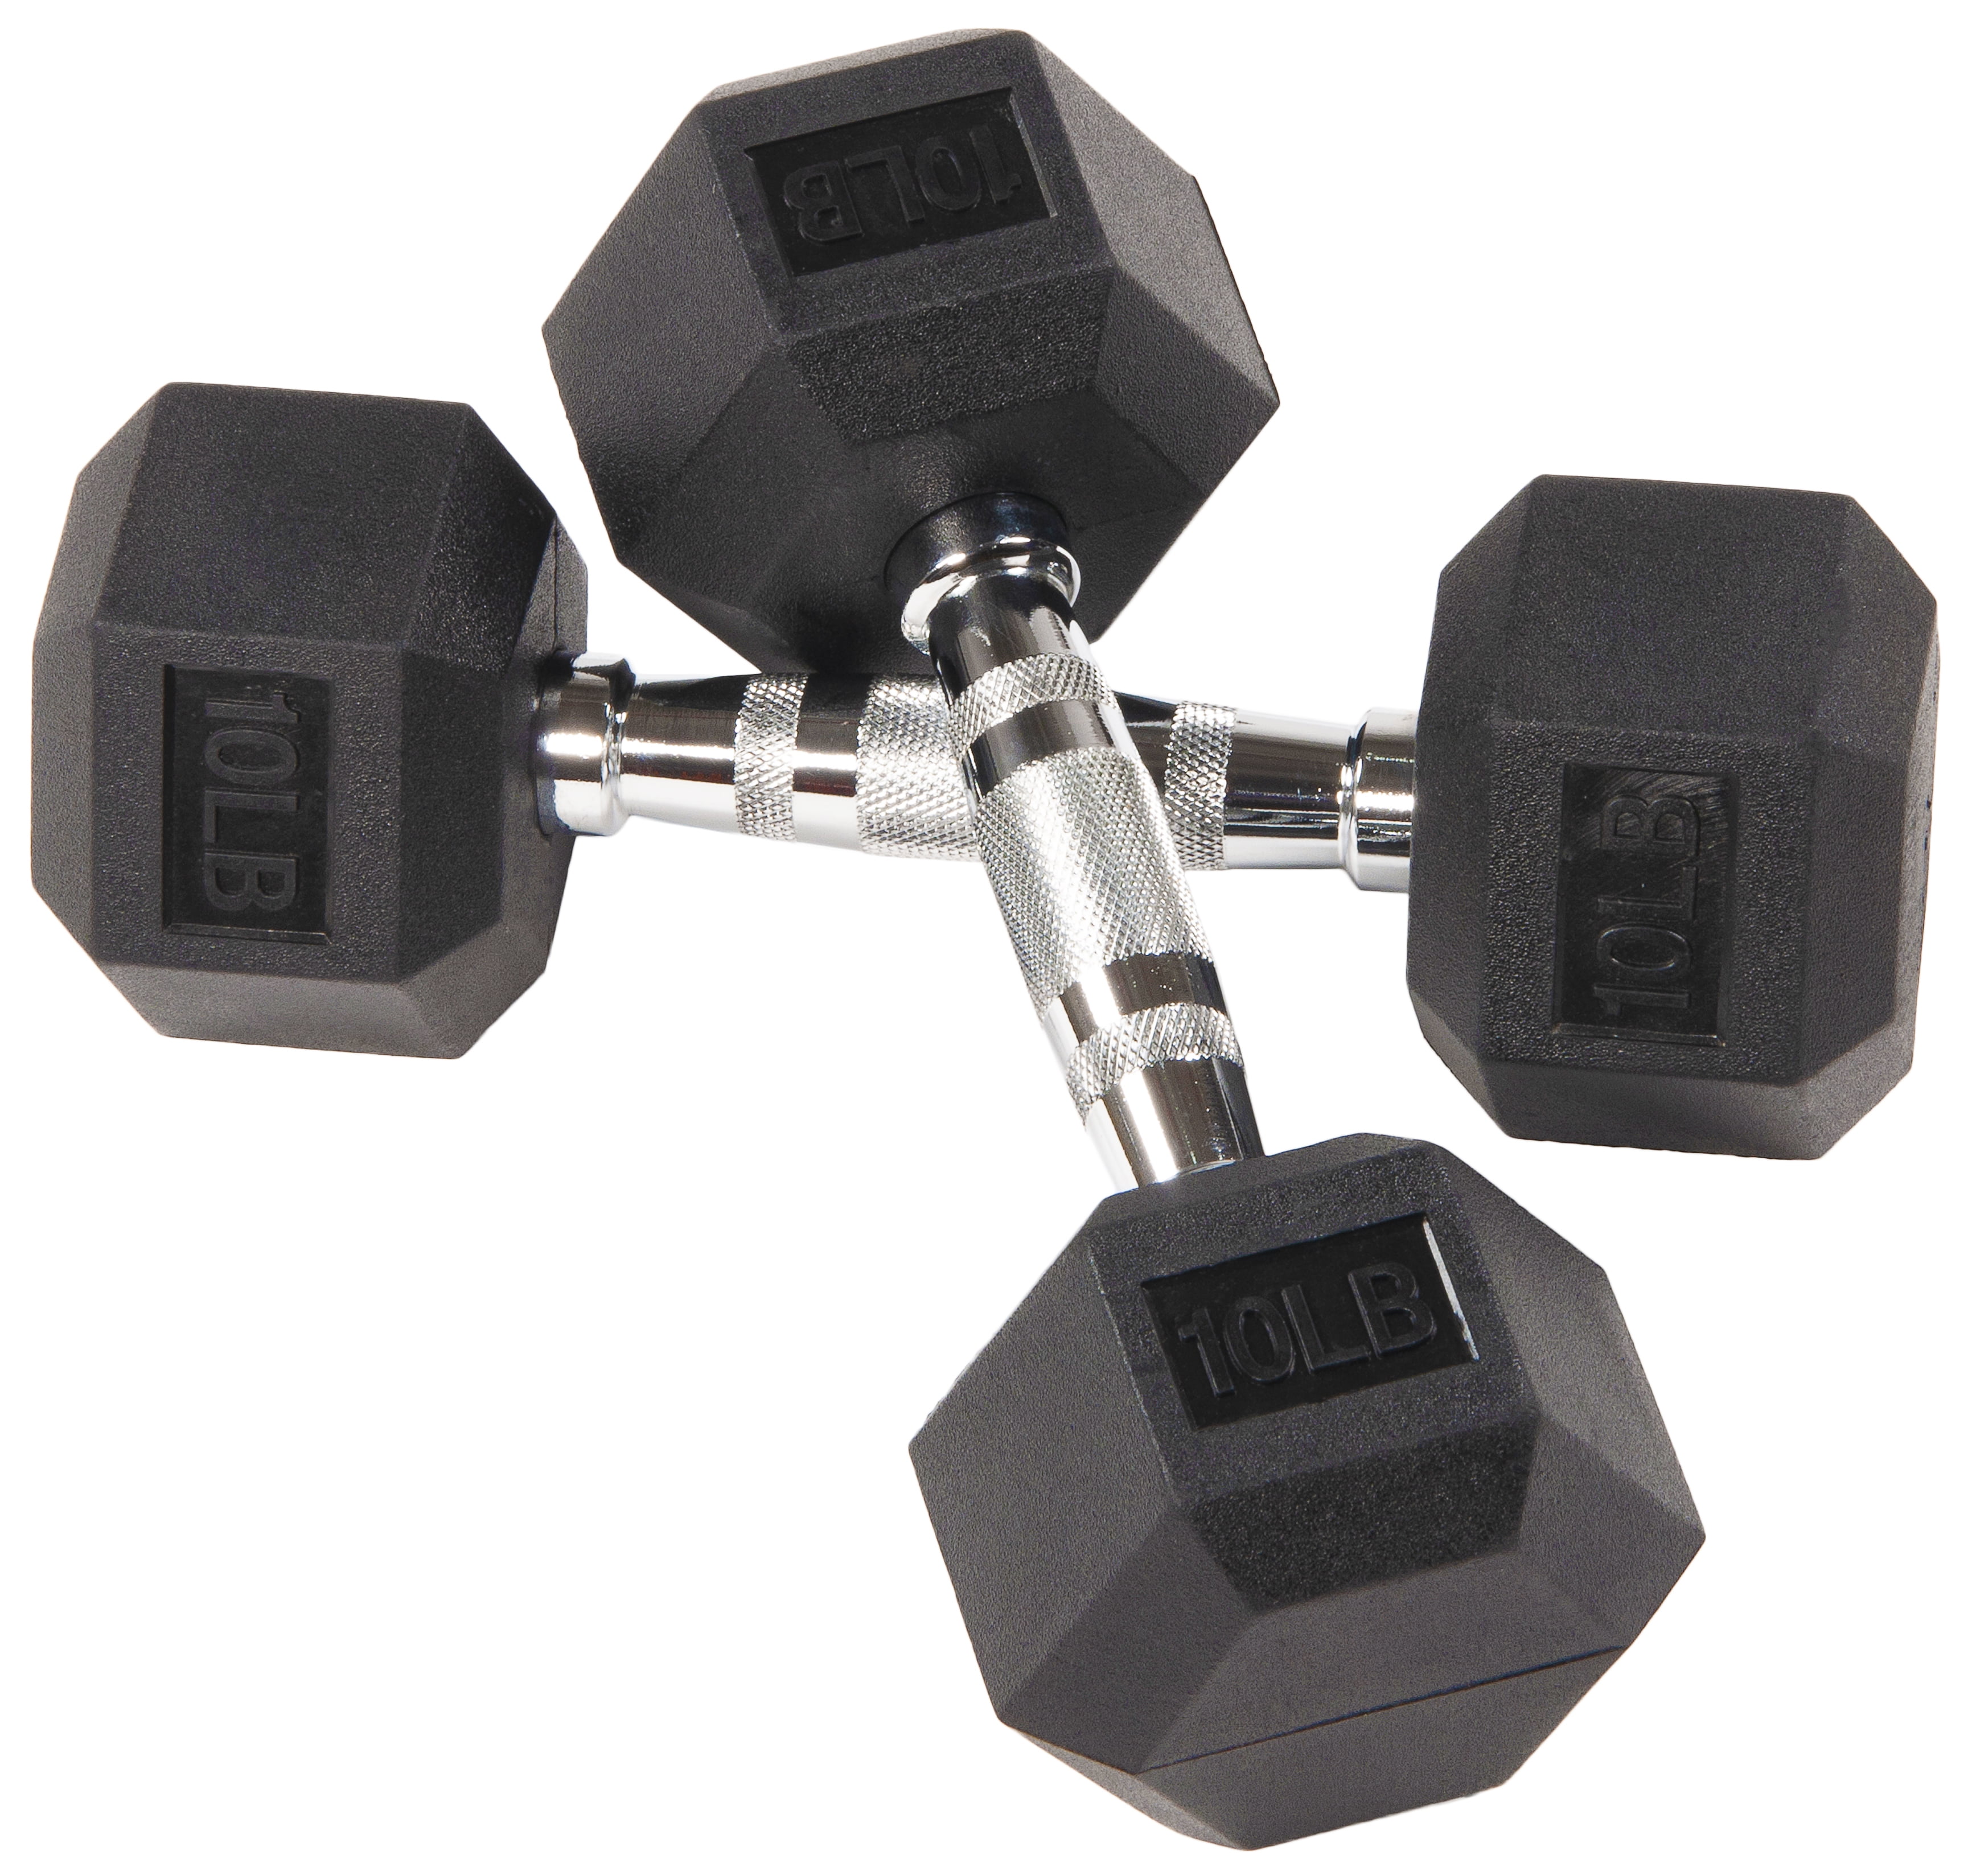 Rubber Encased Hexagonal Cast Iron Dumbbell Weights MOTION Hex Dumbbells Knurled Chrome Handle Heavy Duty Rubber Commercial Dumbbell Weight Sets for Weight Training